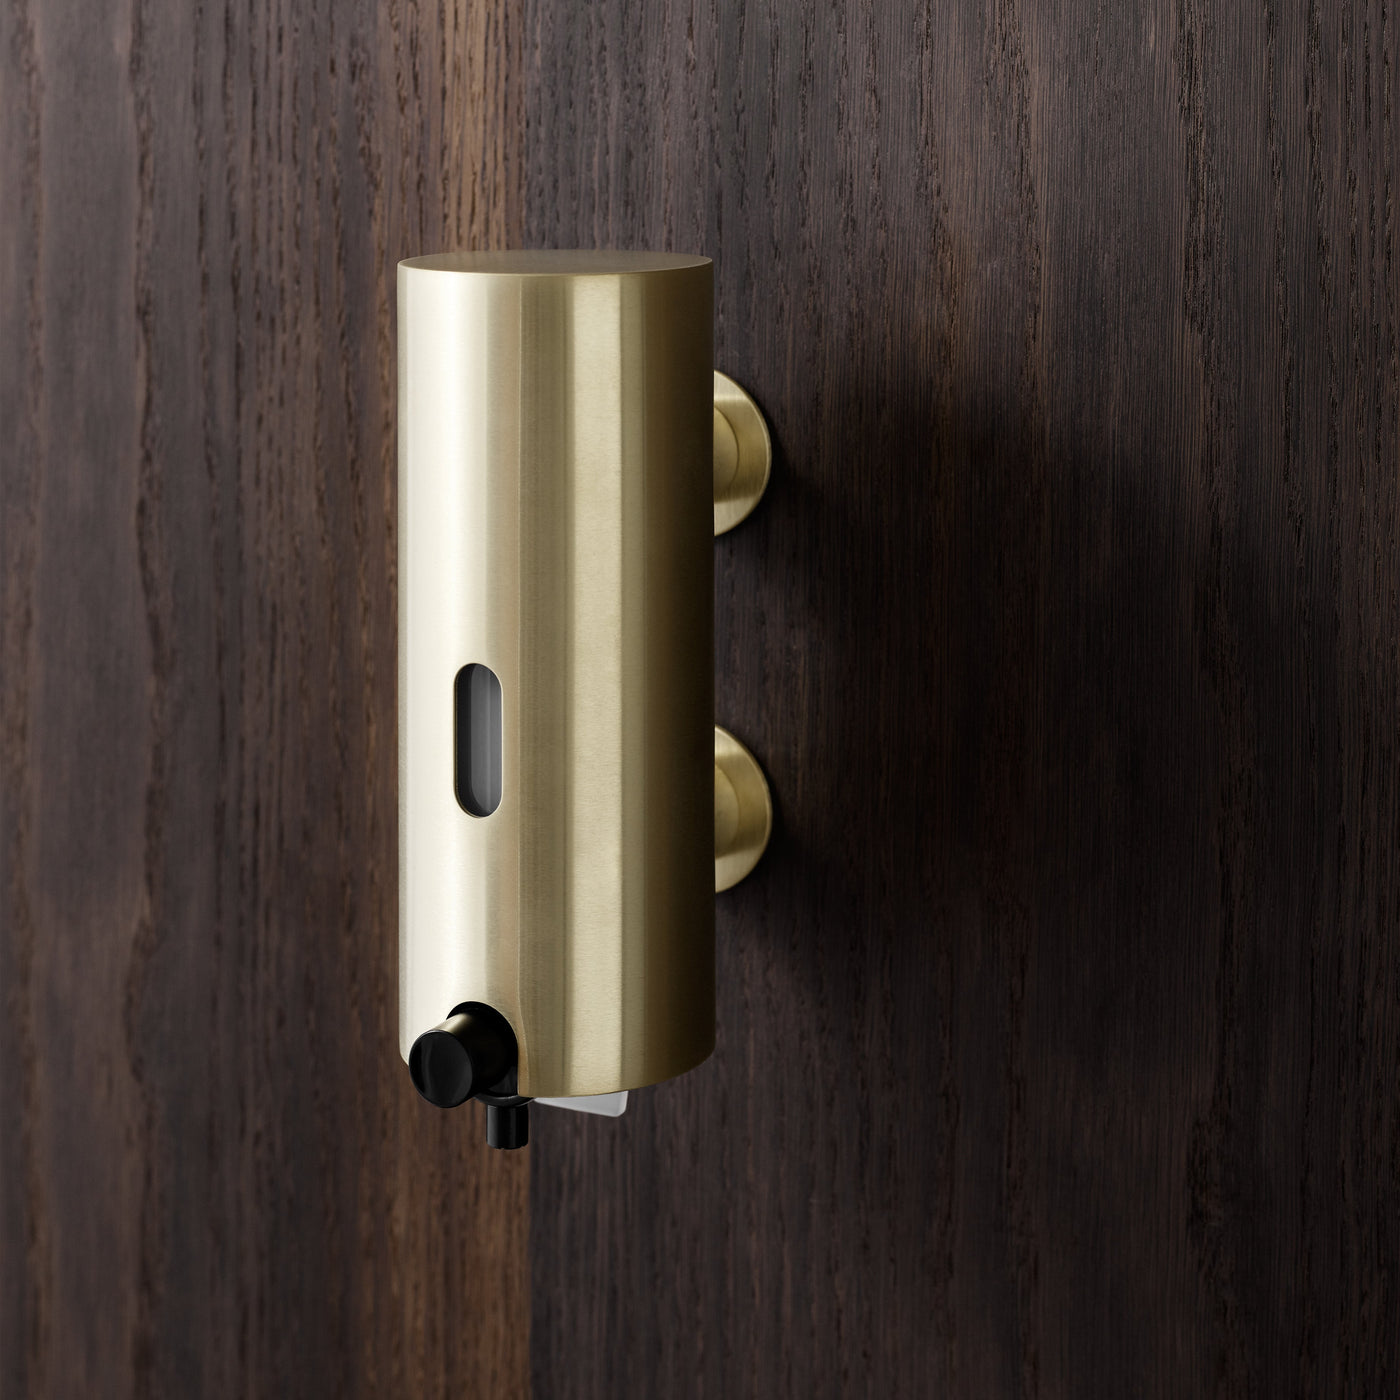 The Knud Soap Dispenser is part of the sanitary line by d line and is available for residential or commercial use.  Shown here in brass.